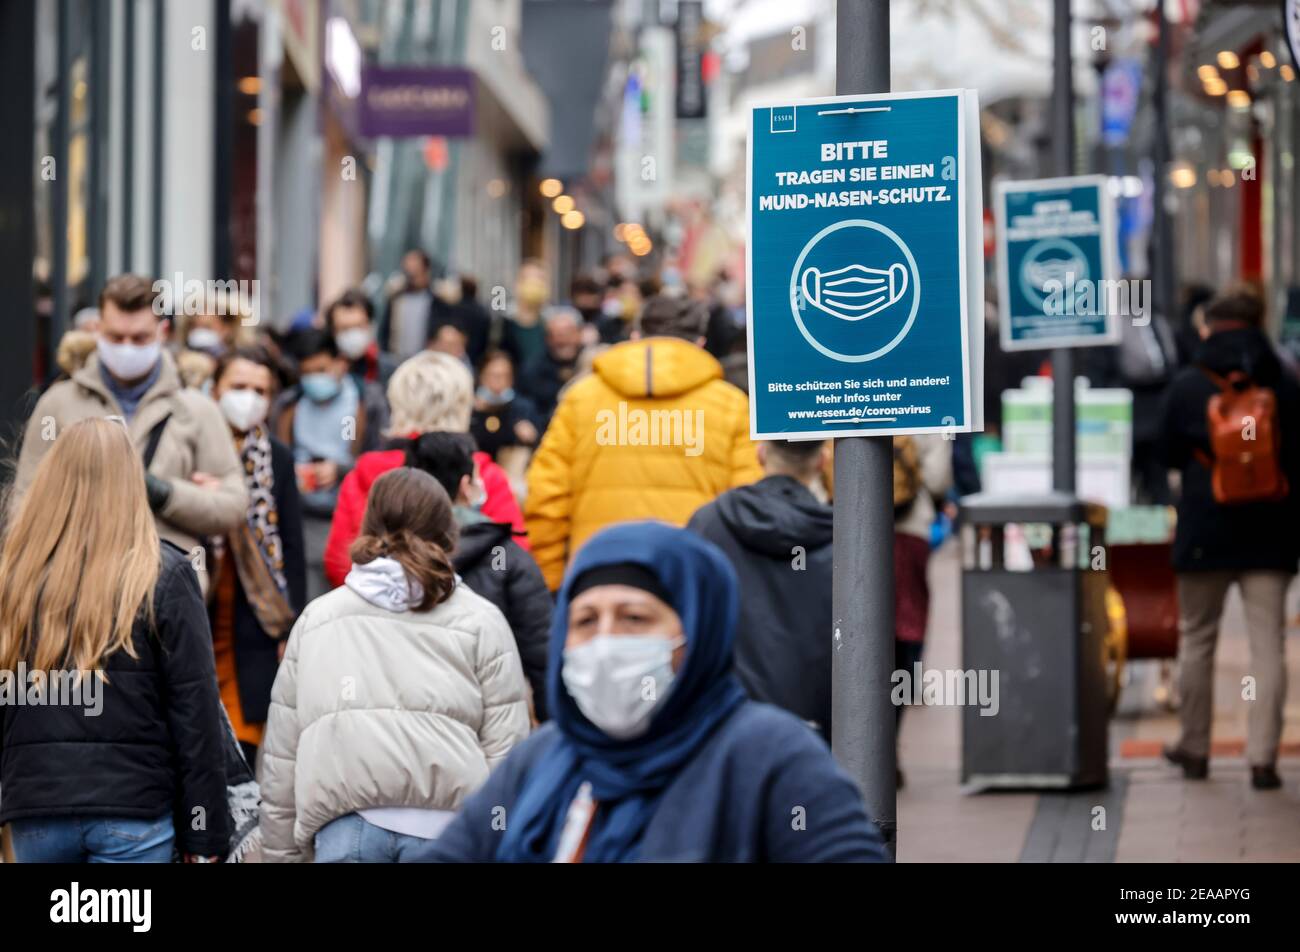 Essen, Ruhr area, North Rhine-Westphalia, Germany - Essen city center in times of the corona crisis during the second part of the lockdown, many passers-by with protective masks during Christmas shopping on Limbecker Strasse on the Saturday before the hard lockdown, information sign PLEASE WEAR MOUTH AND NOSE PROTECTION, in In Essen's pedestrian zone there is no obligation to wear a mask, only a recommendation to wear a mask. Stock Photo